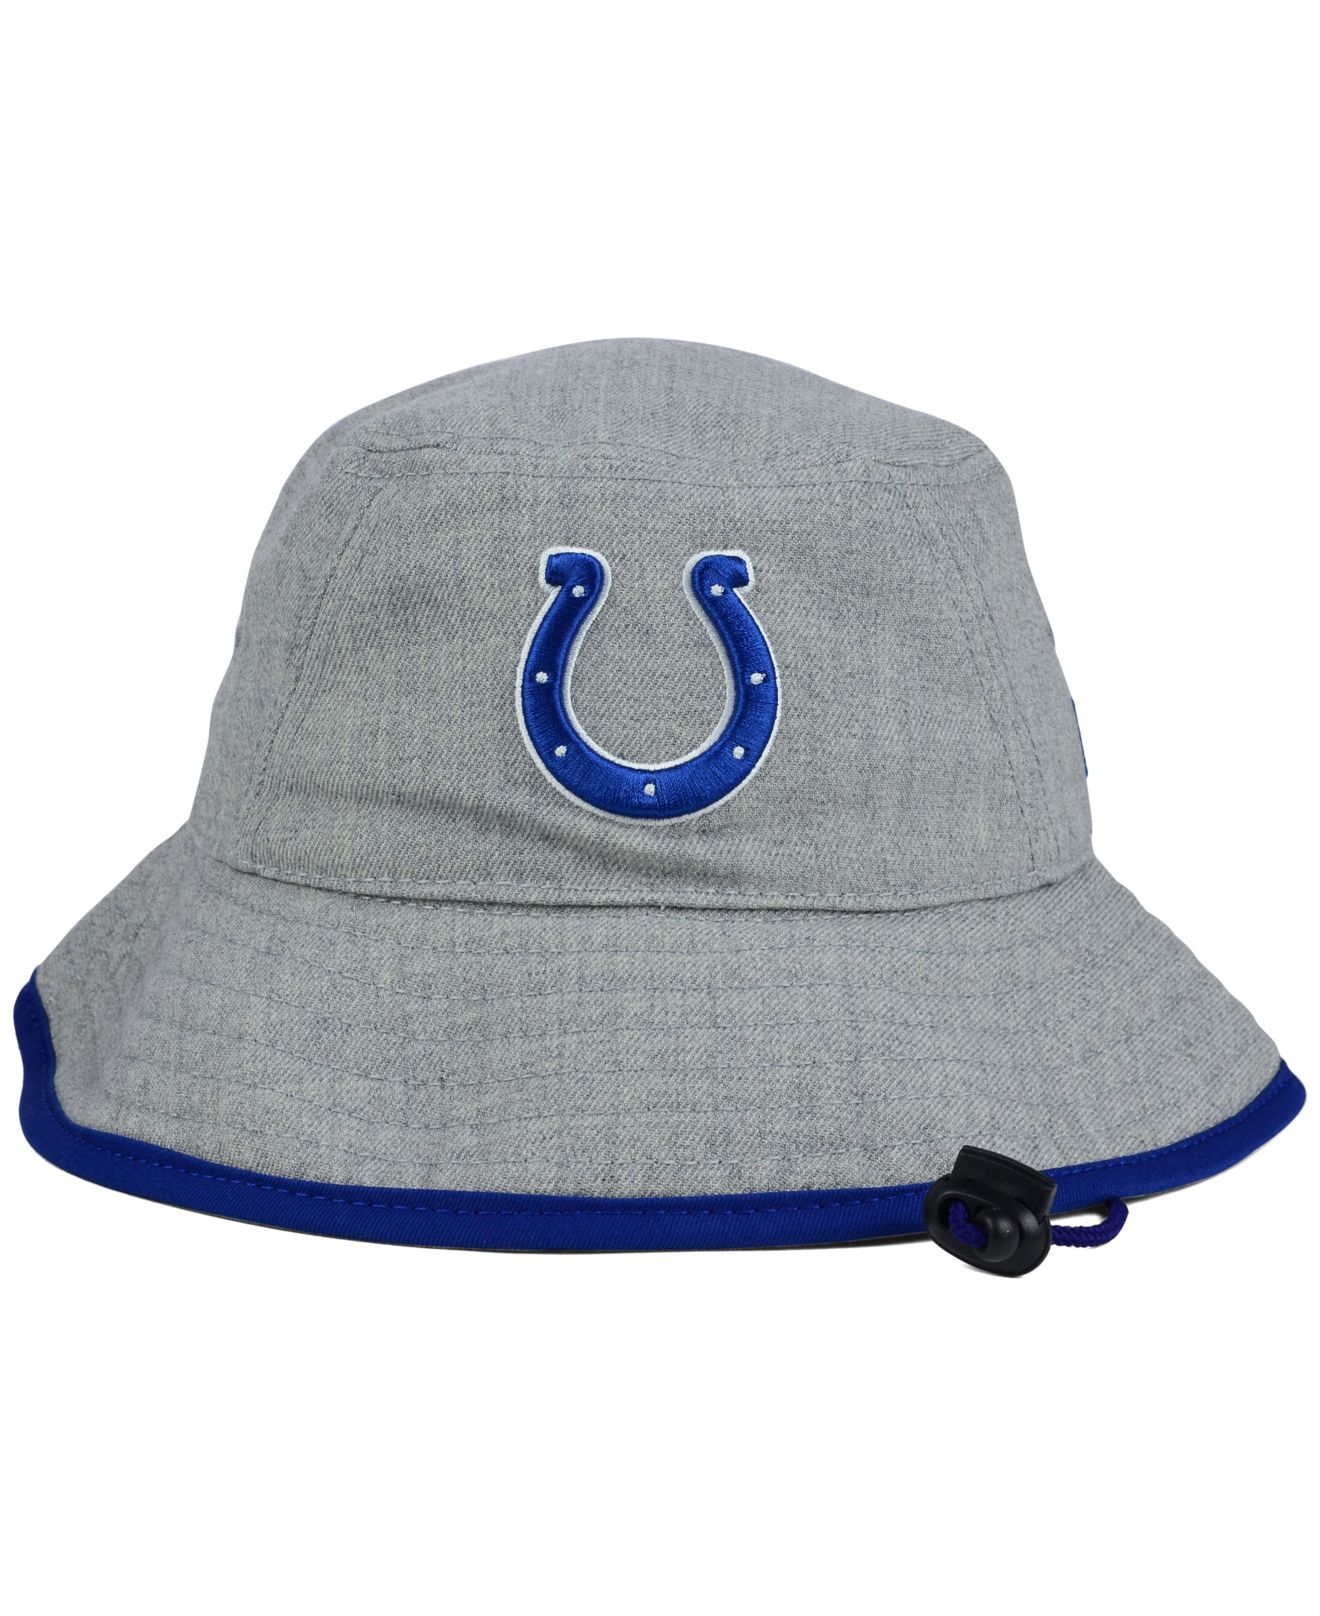 KTZ Indianapolis Colts Nfl Heather Gray Bucket Hat for Men - Lyst